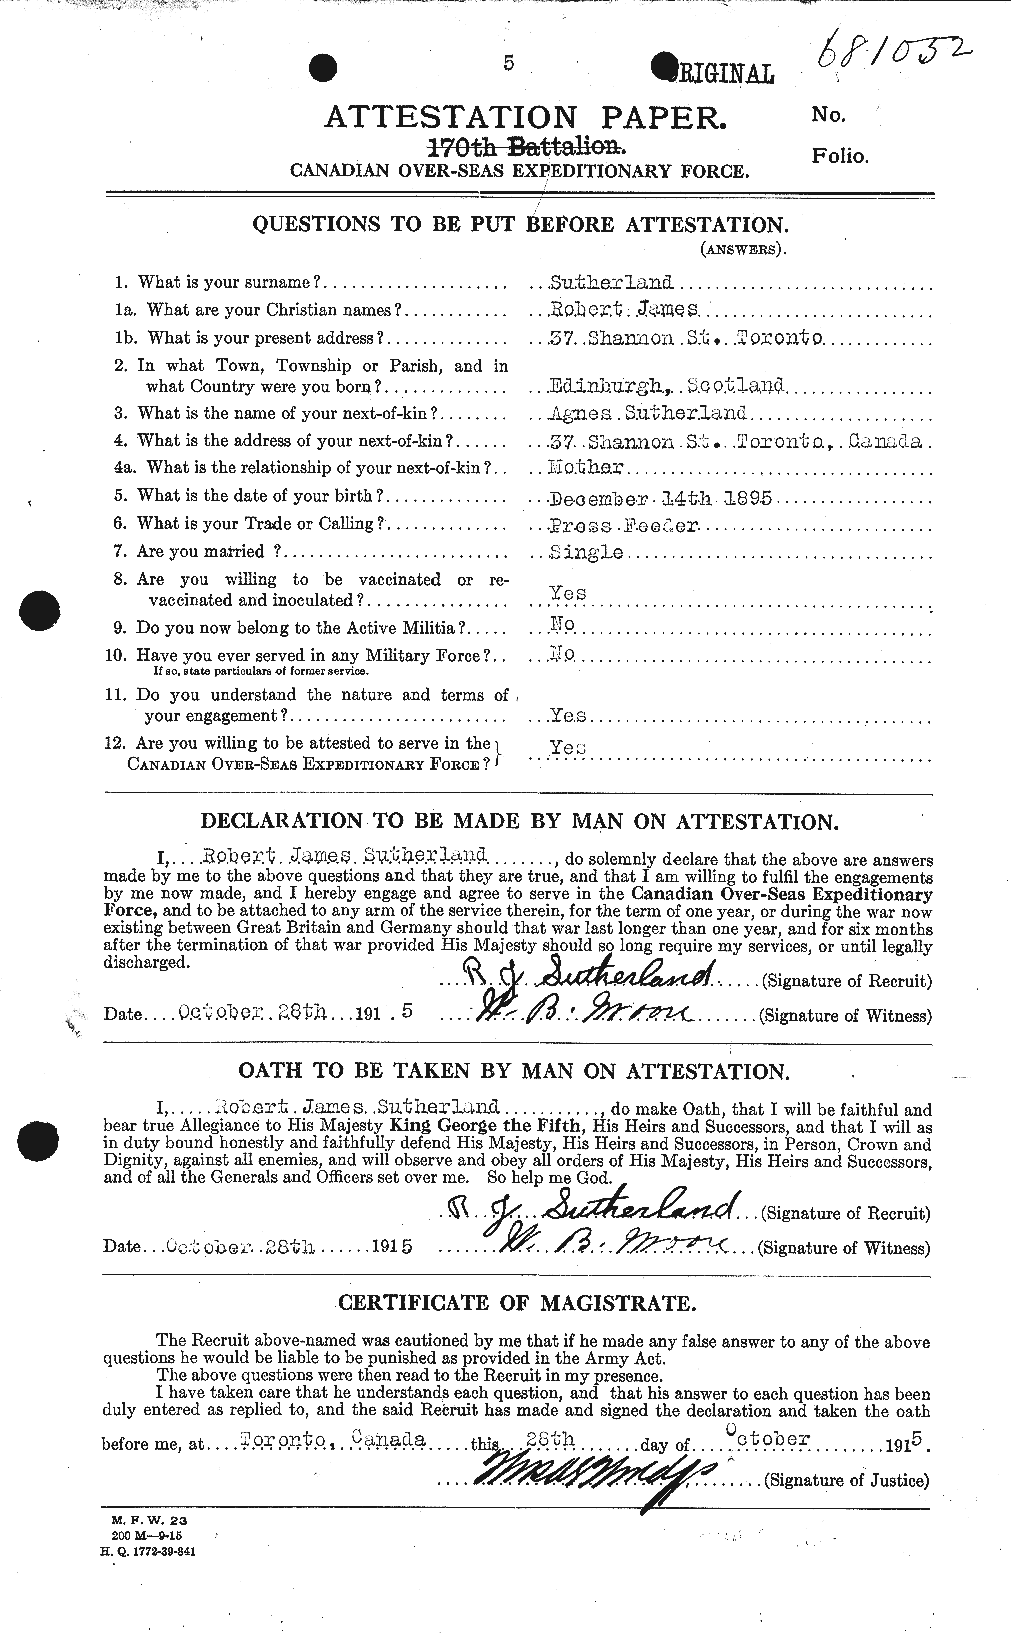 Personnel Records of the First World War - CEF 126791a